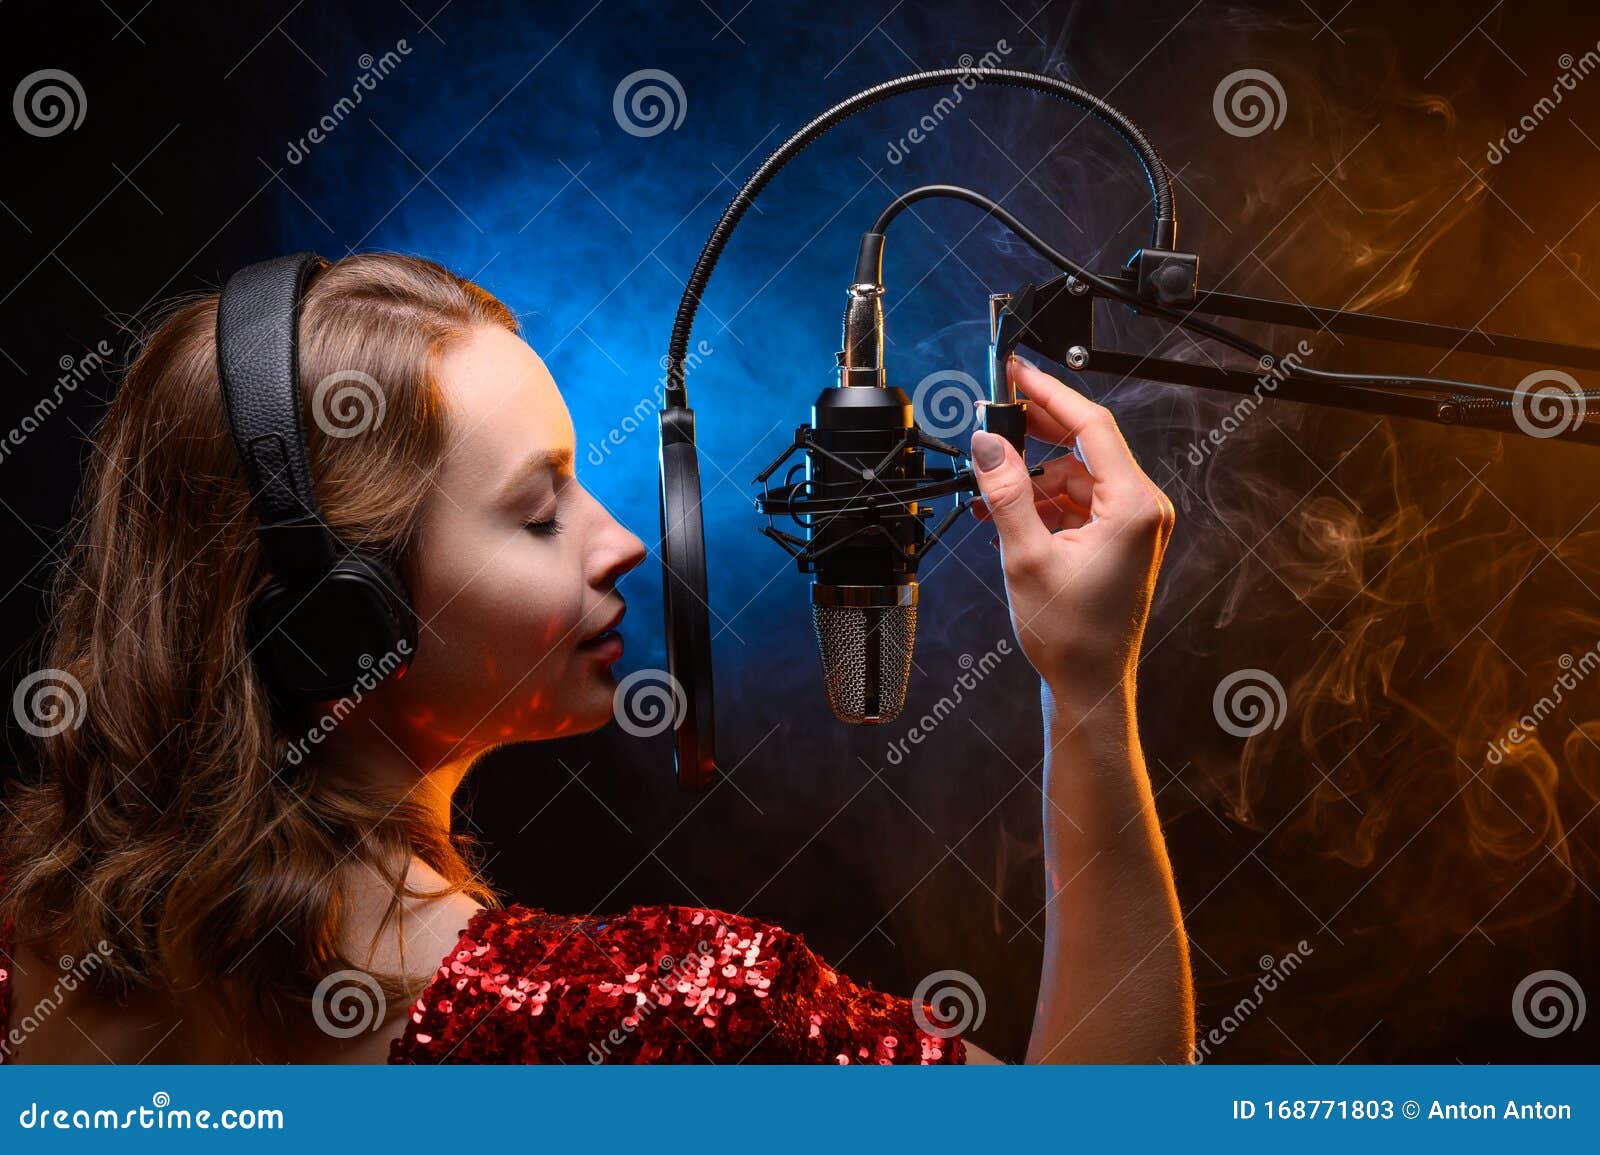 vocalist singing in the studio. school and vocals. against the backdrop of blue and orange smoke